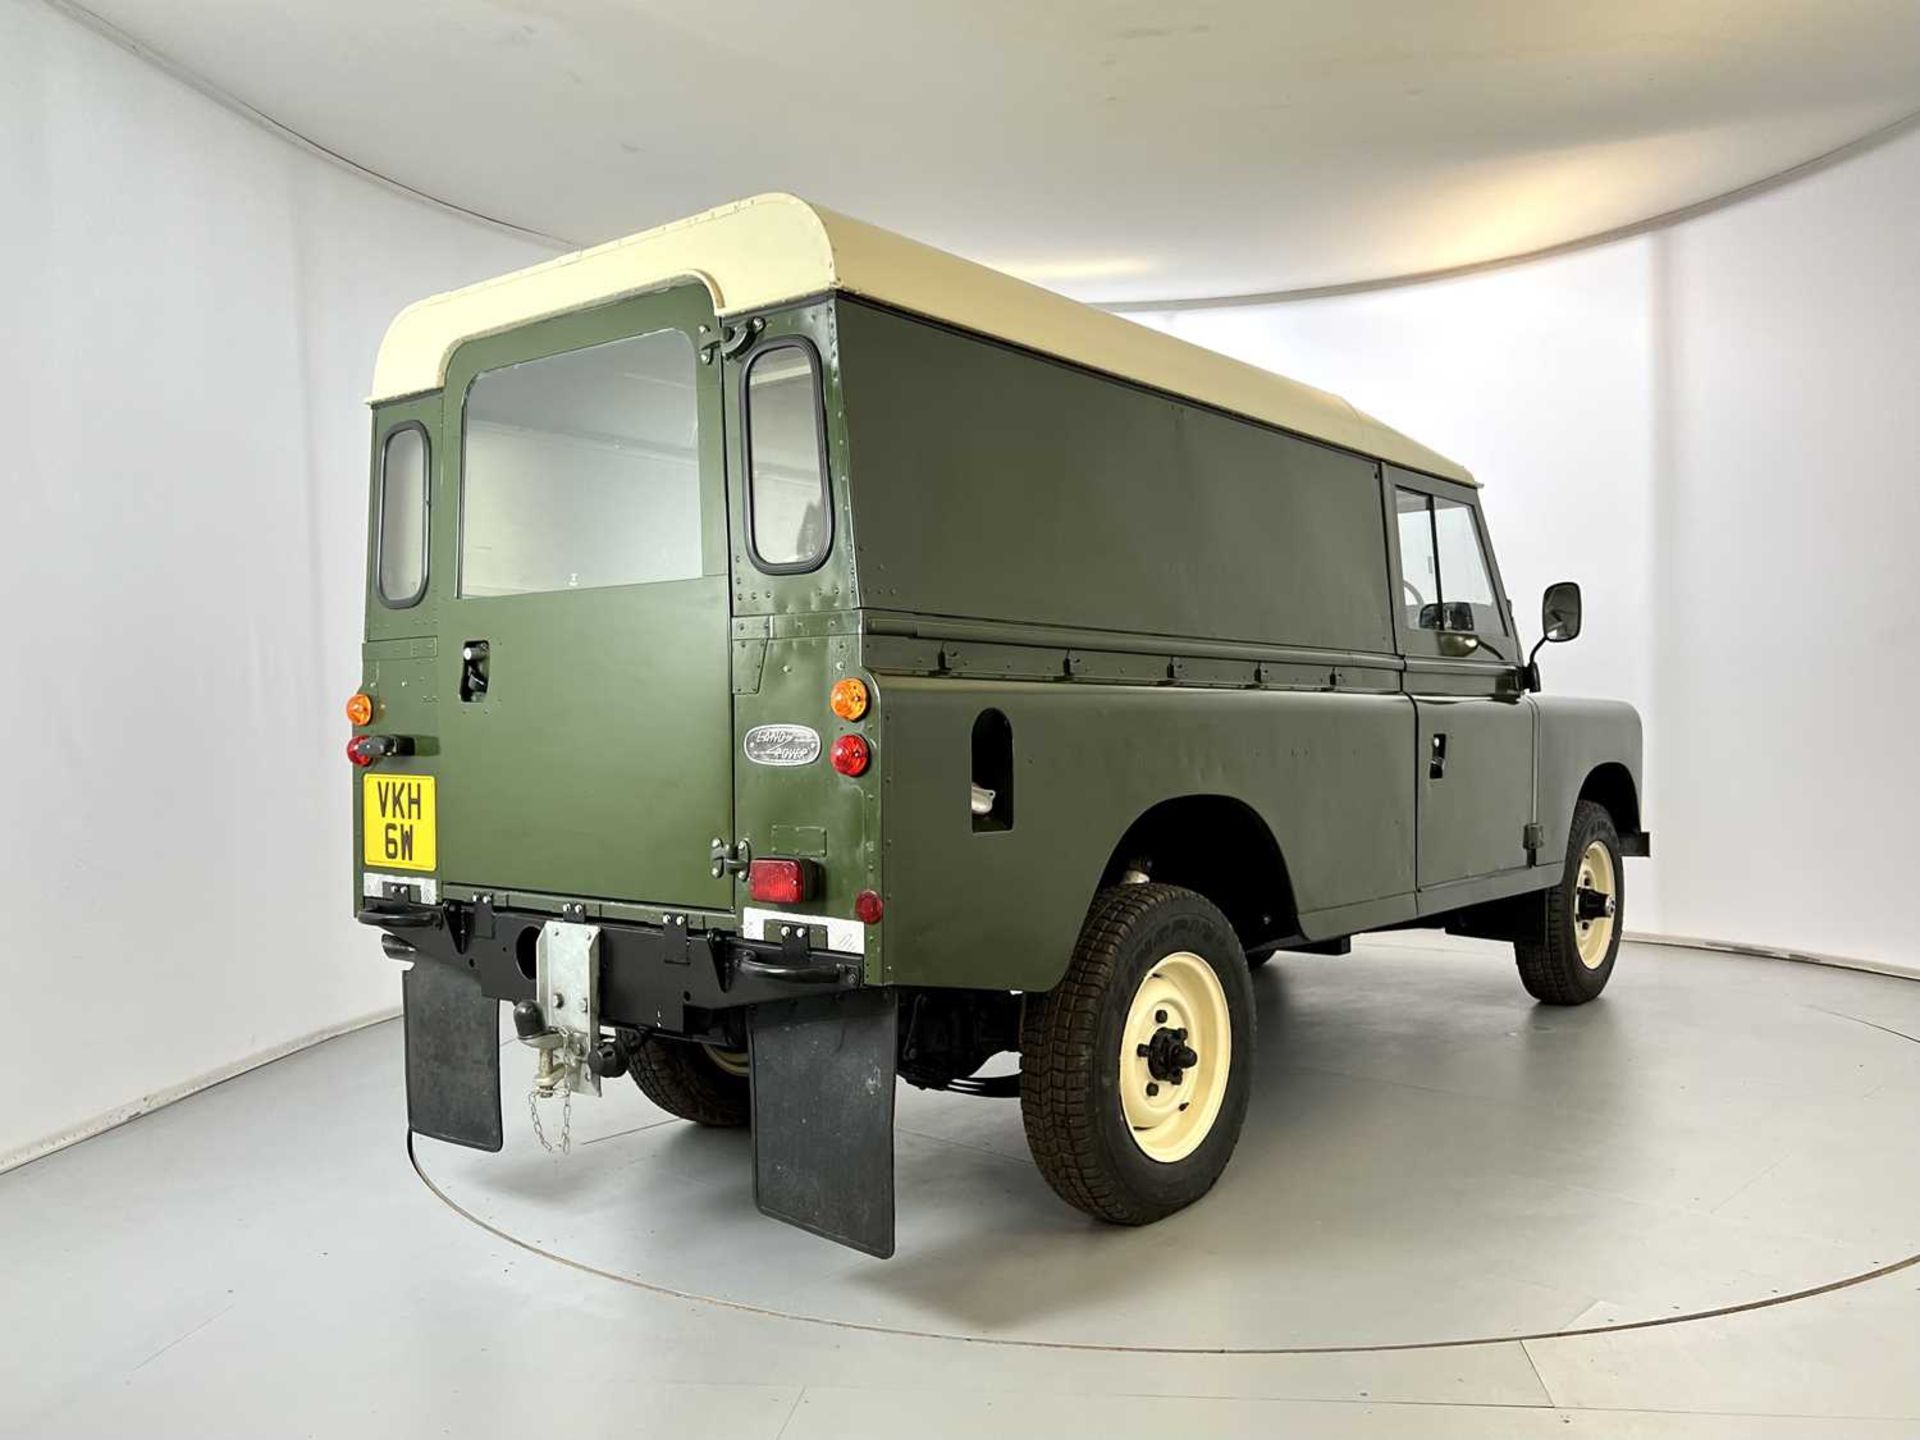 1981 Land Rover Series 3 - 6 Cylinder - Image 9 of 31